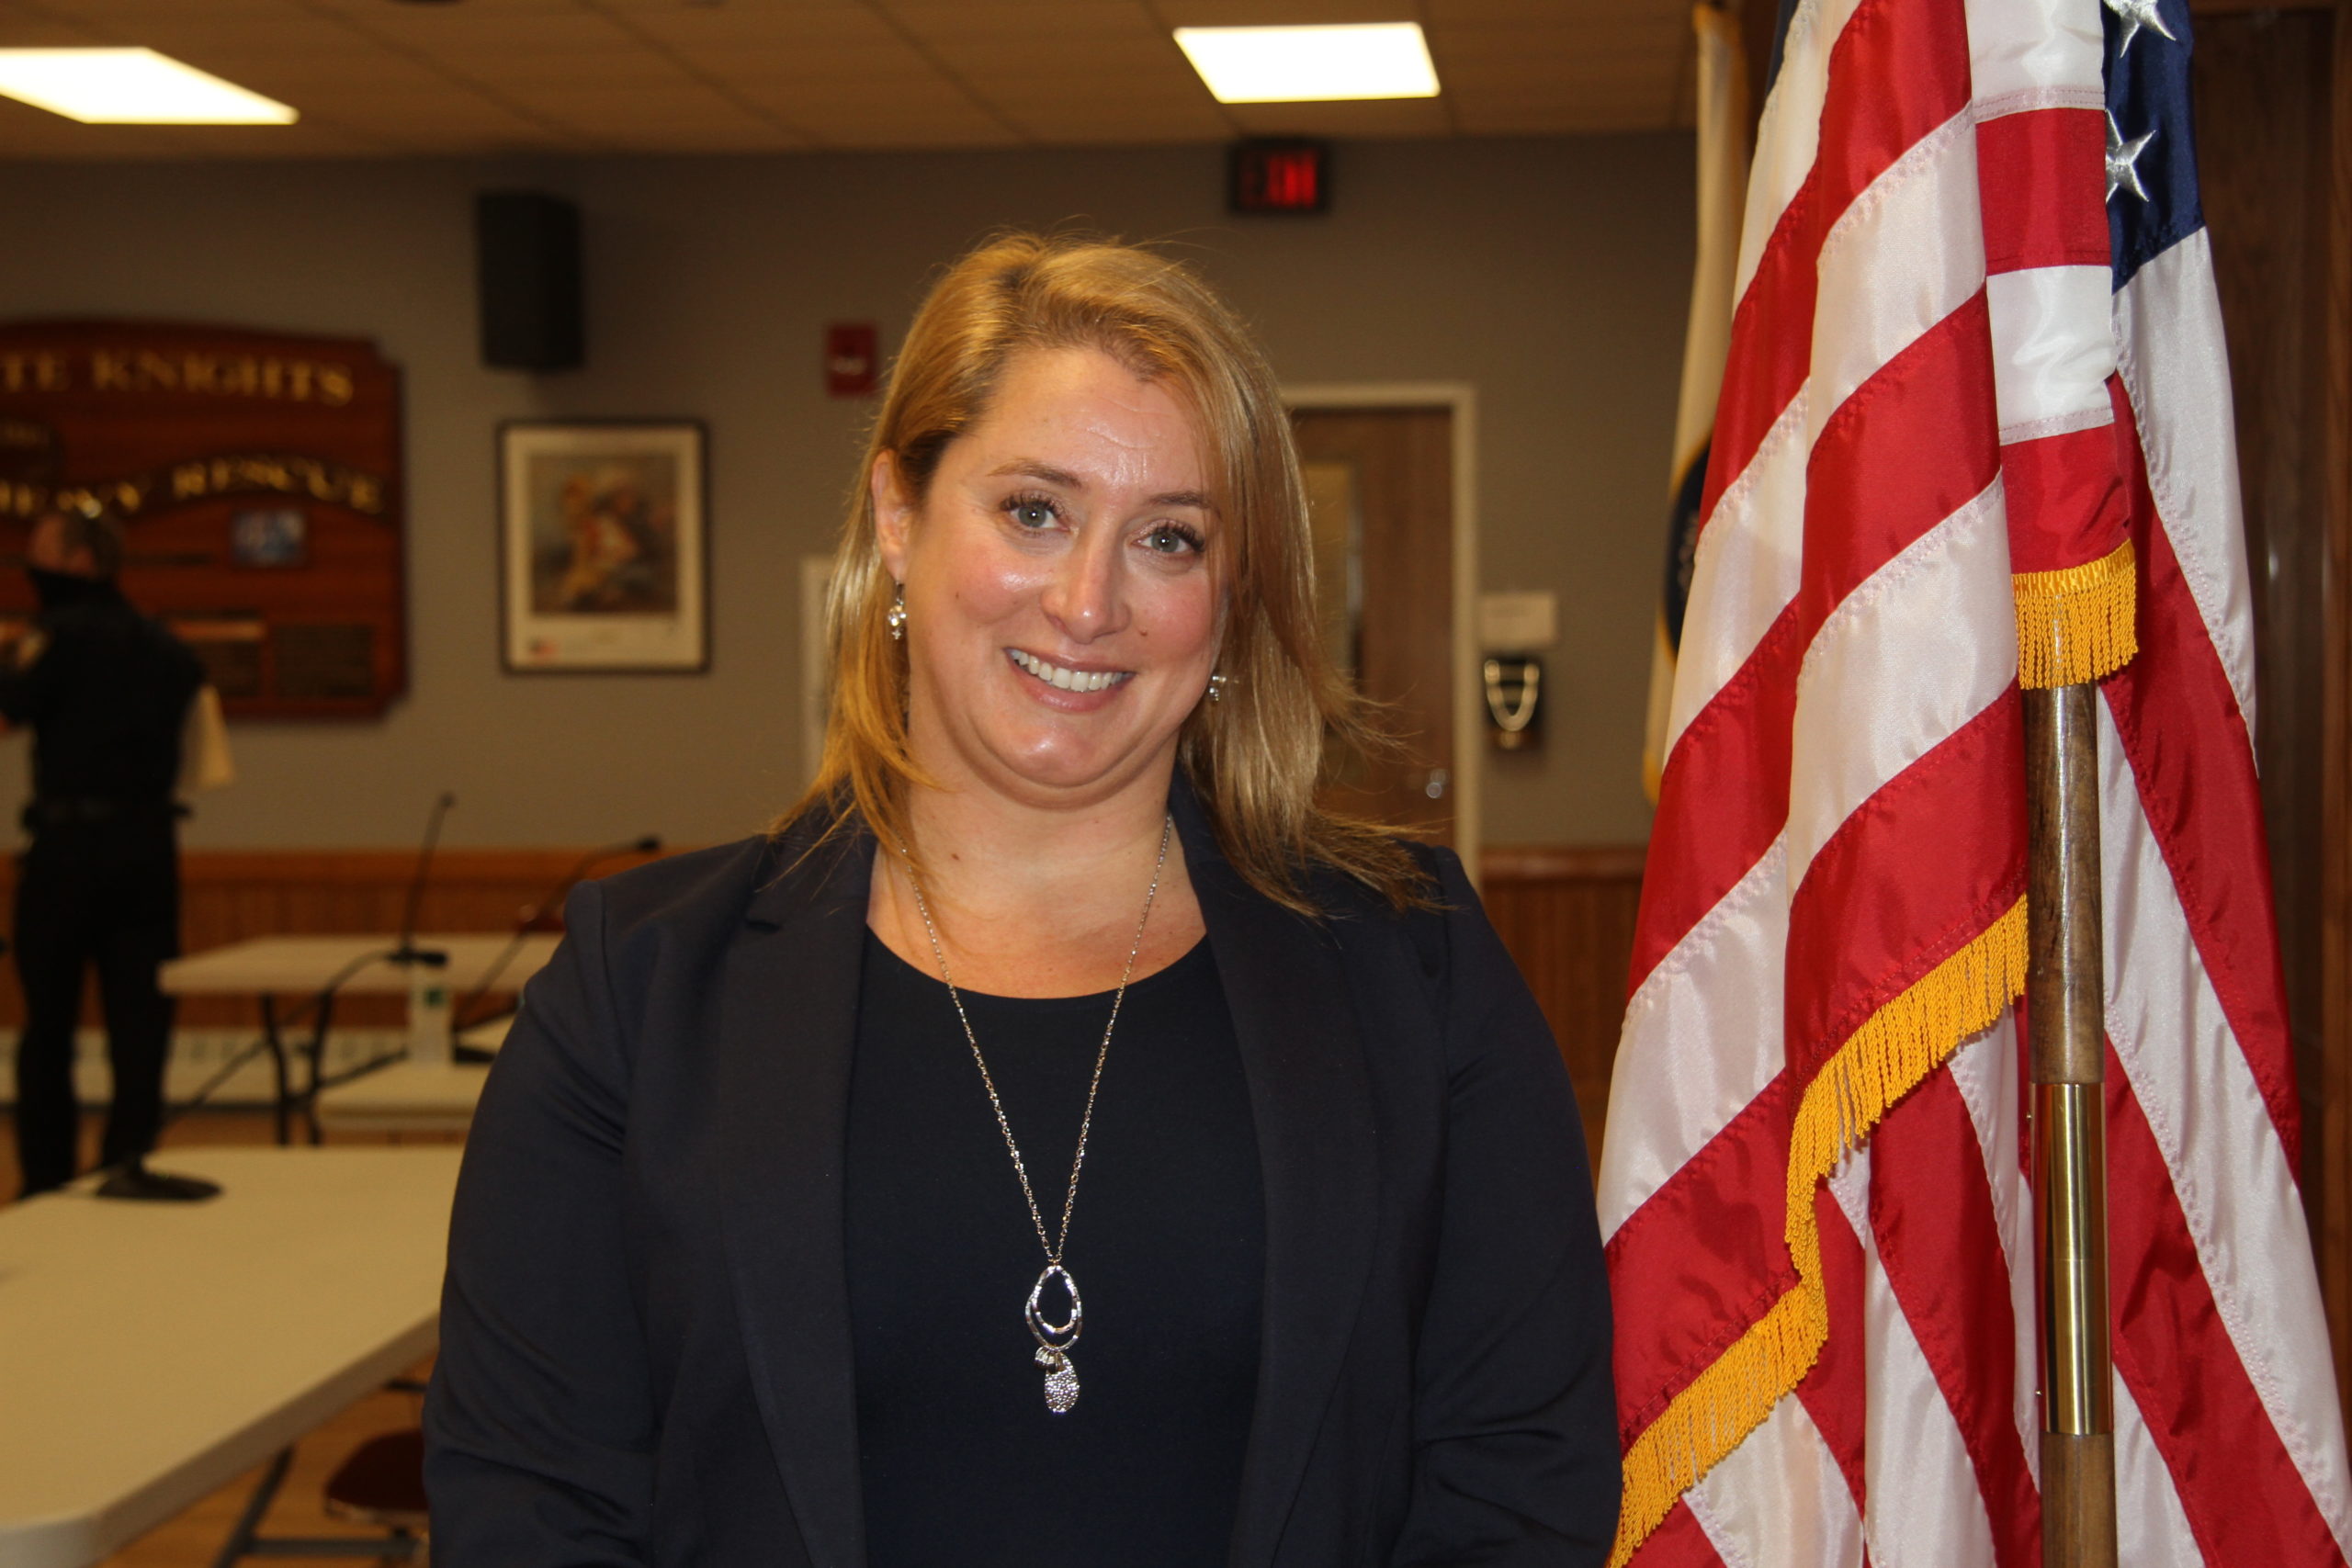 Rebecca Molinaro abruptly resigned as the village administrator last week, to take a newly vacant position with East Hampton Town, and Mayor Jerry Larsen announced at Friday's Village Board meeting that his former campaign manager, Marcos Baladron, would be filling the seat. The move was approved by the NewTown Party majority but opposed by Trustees Arthur Graham and Rose Brown, who said they had not even seen Mr. Baladron's resume. 